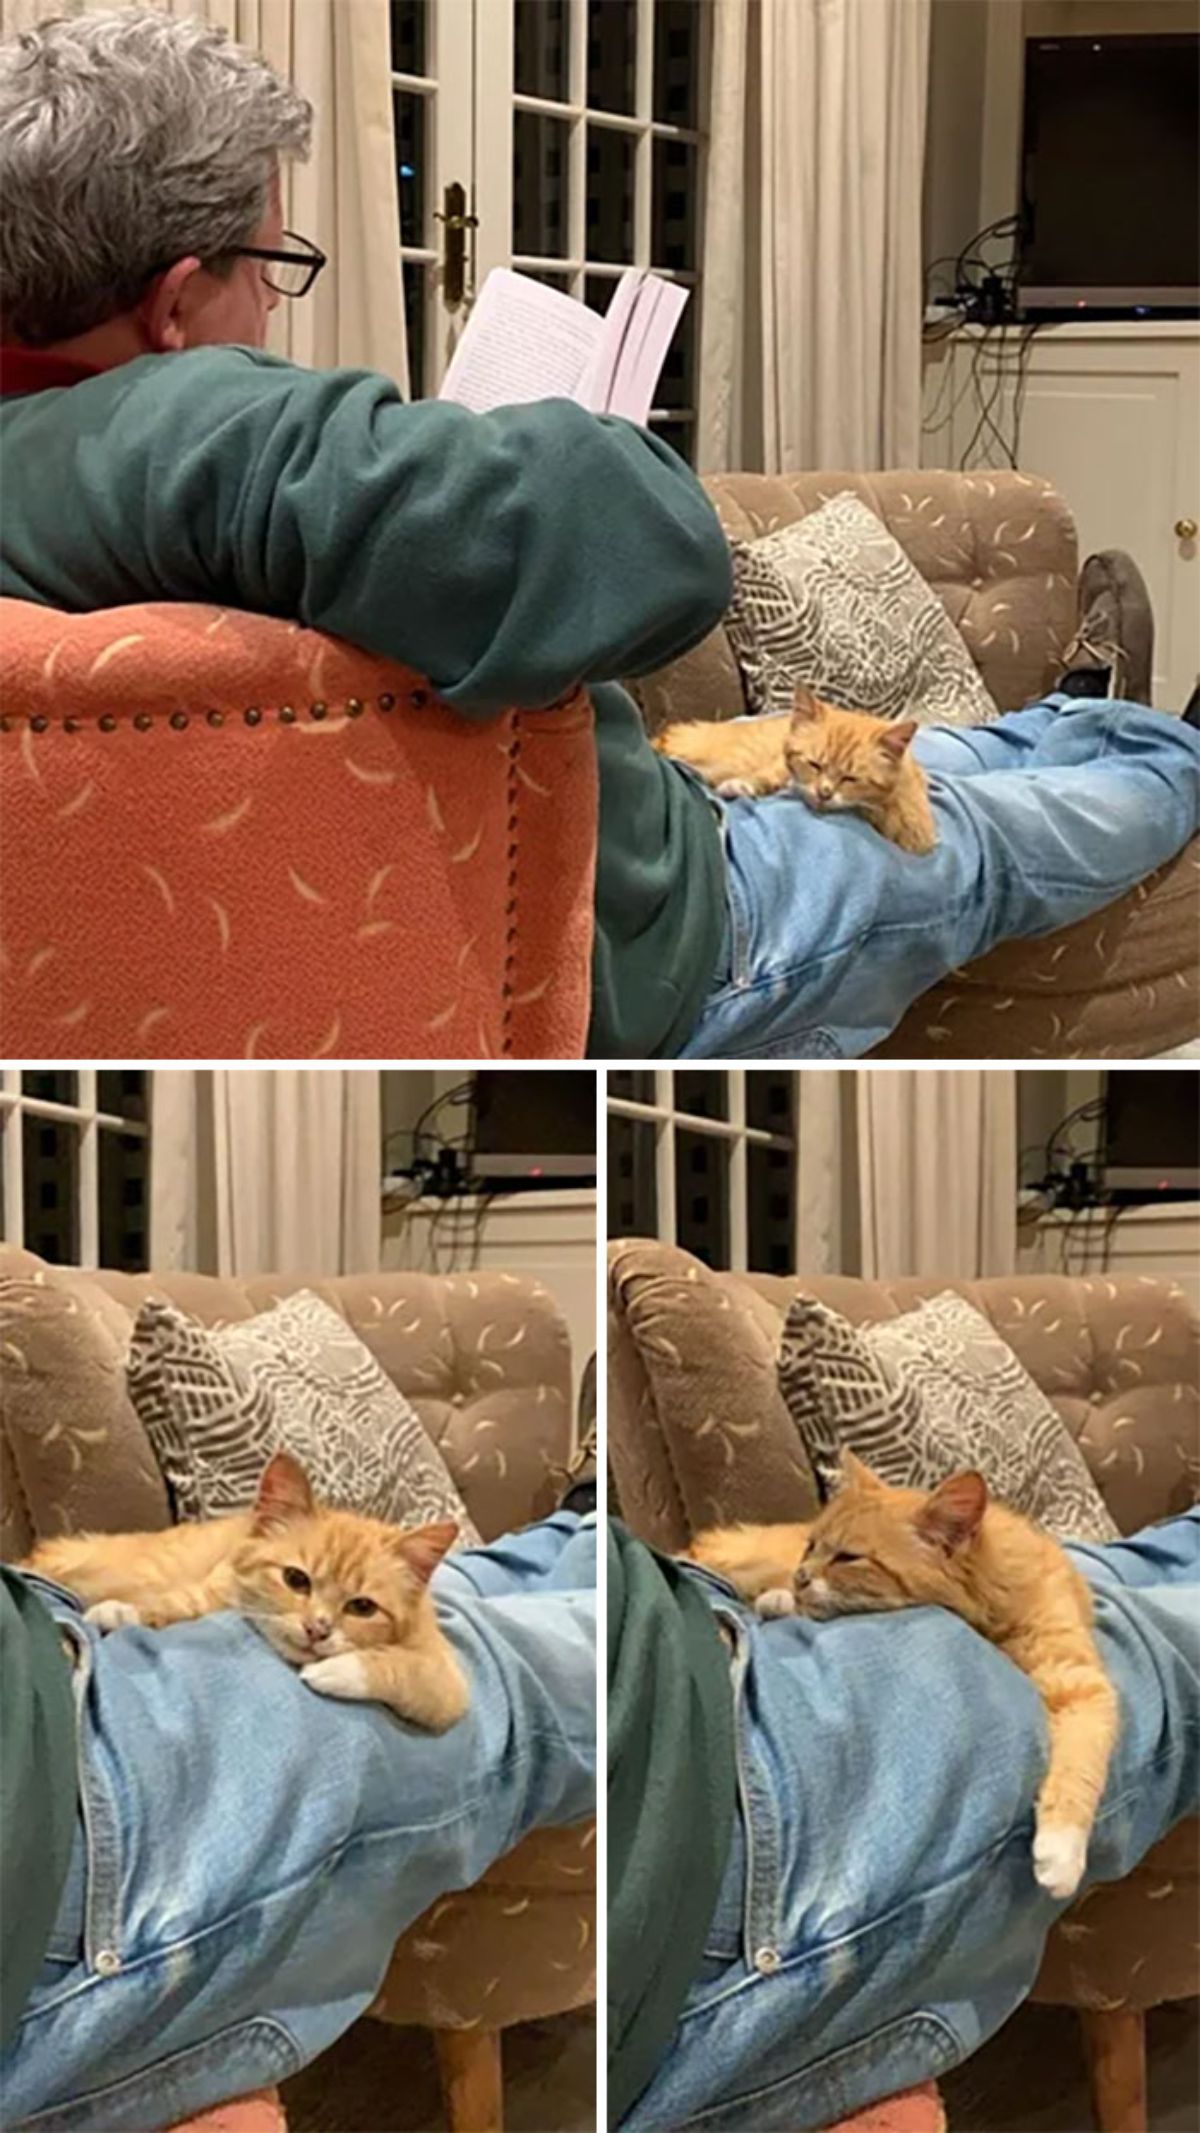 3 photos of an orange and white kitten laying on an old man's knee while he reads a book